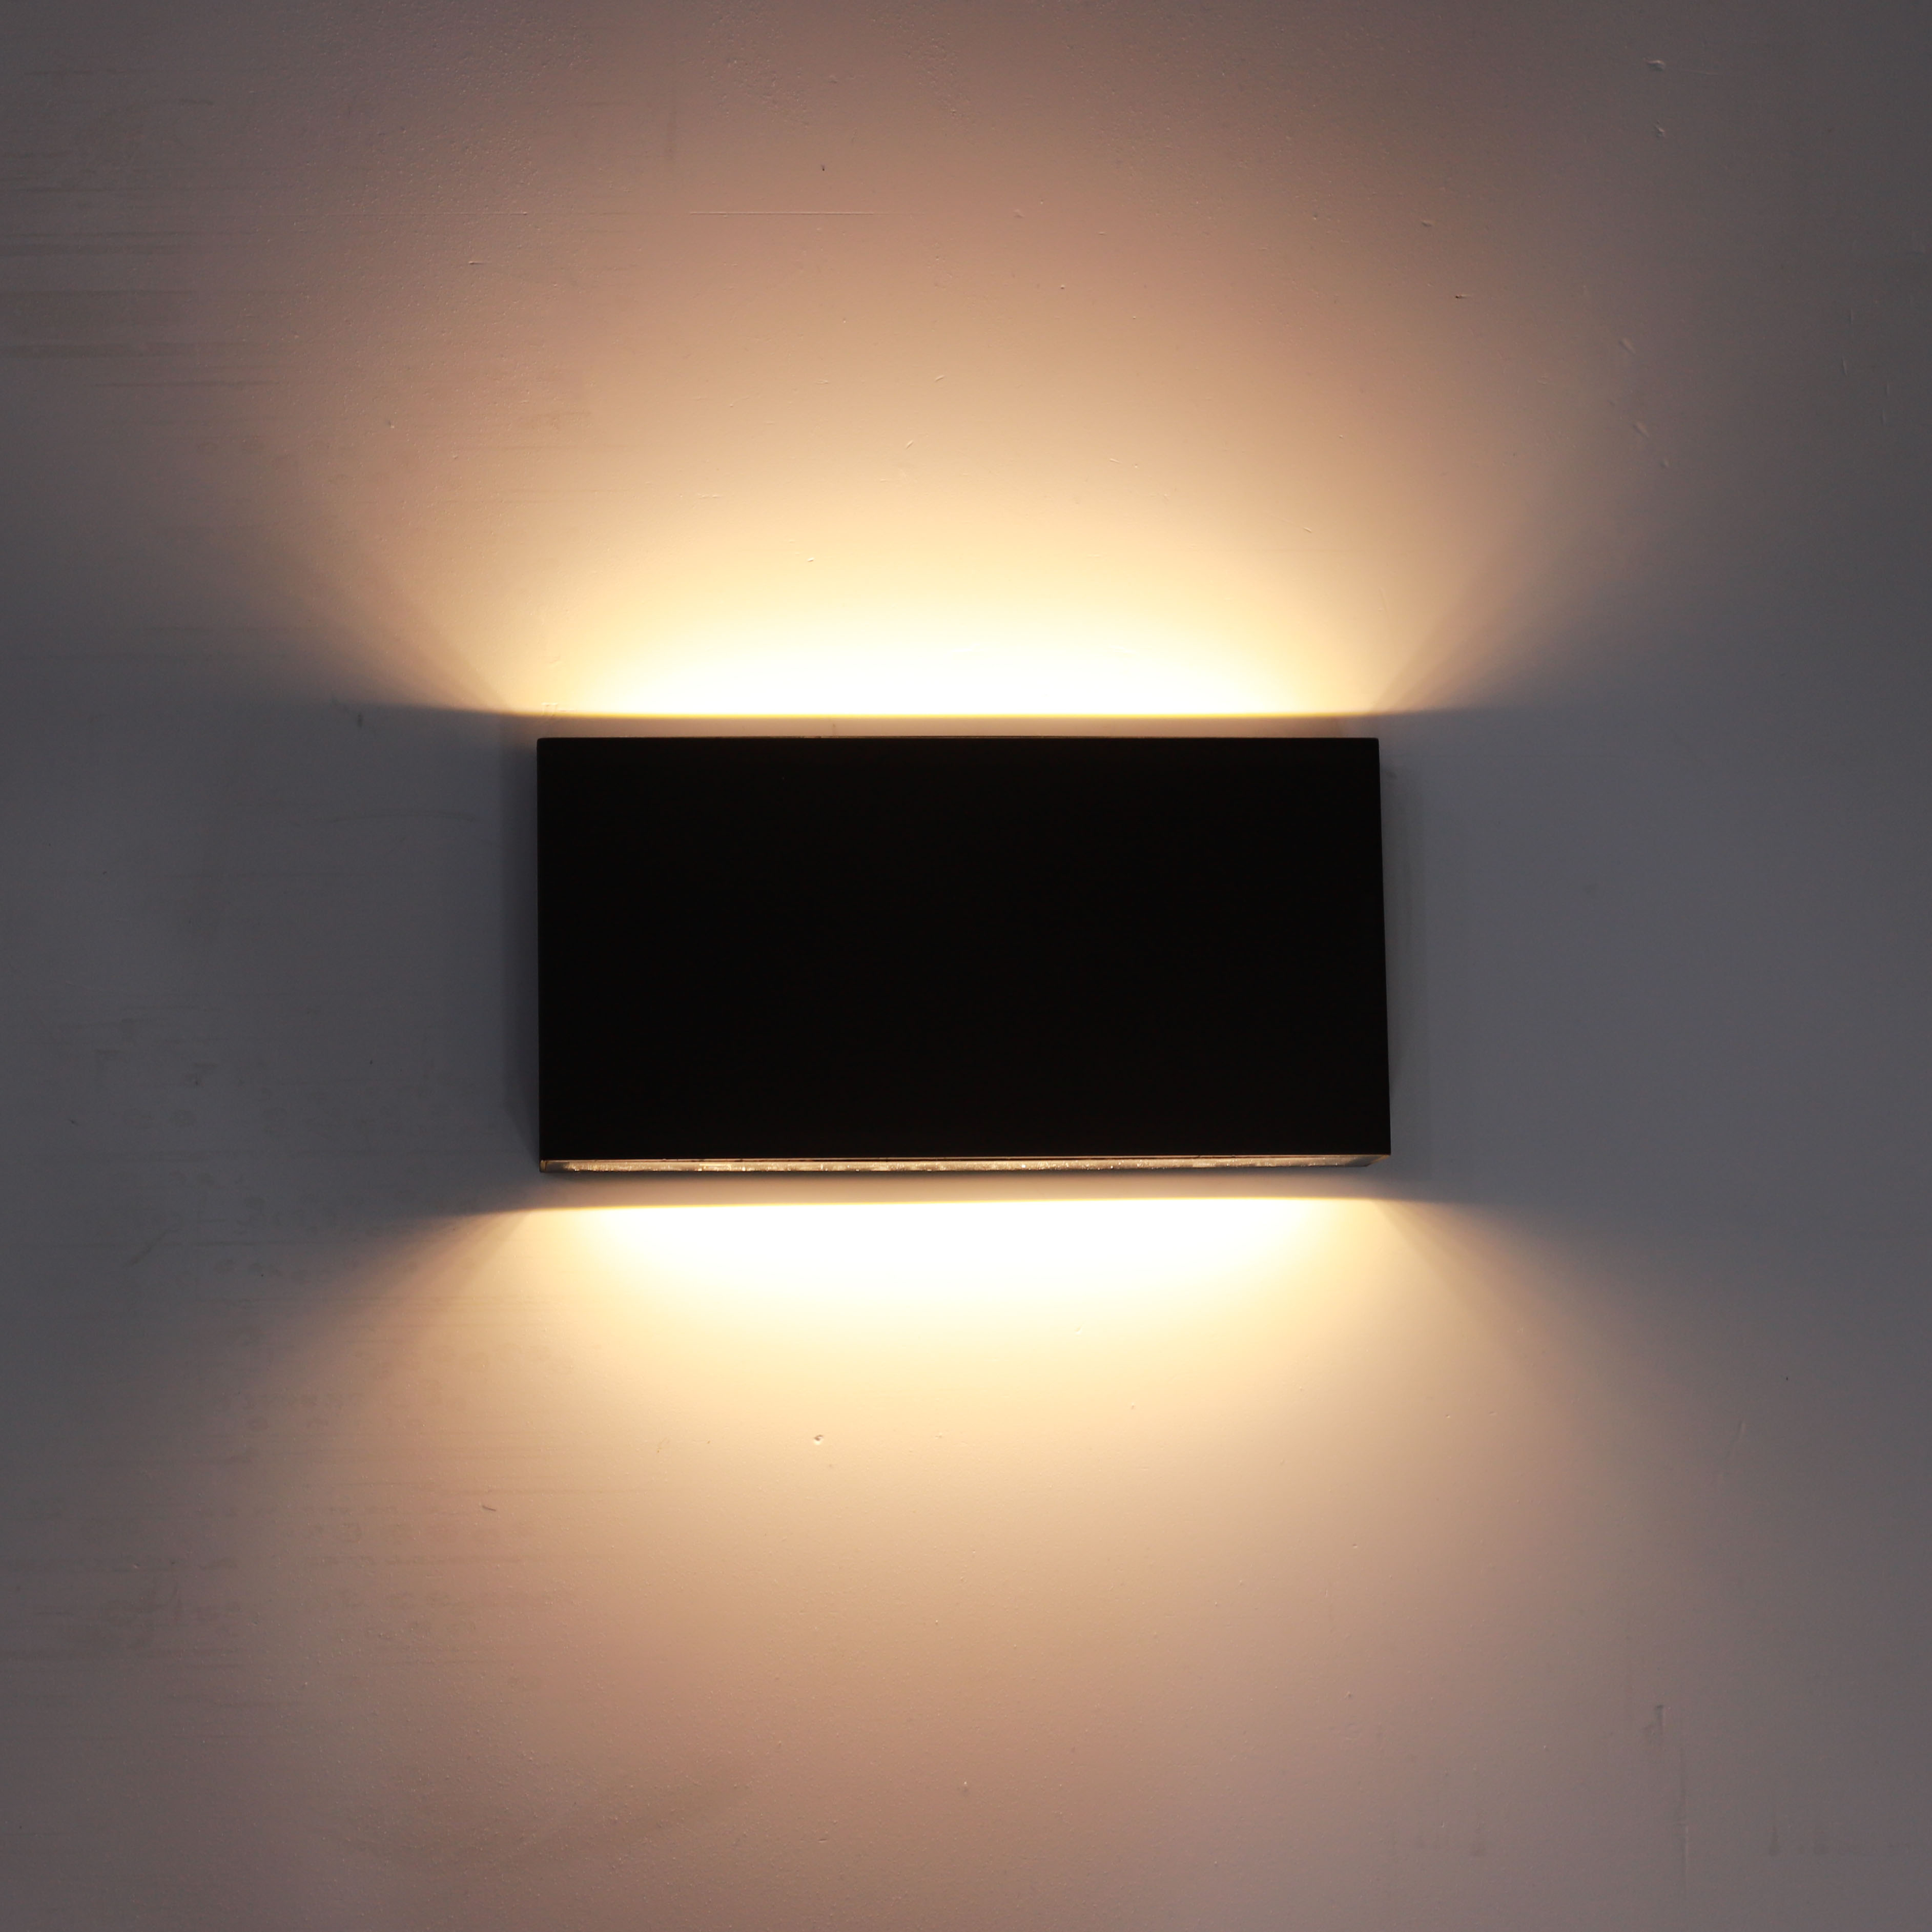 Oteshen High Quality Living room Surface Mounted Slim IP65 Waterproof Led Wall Light